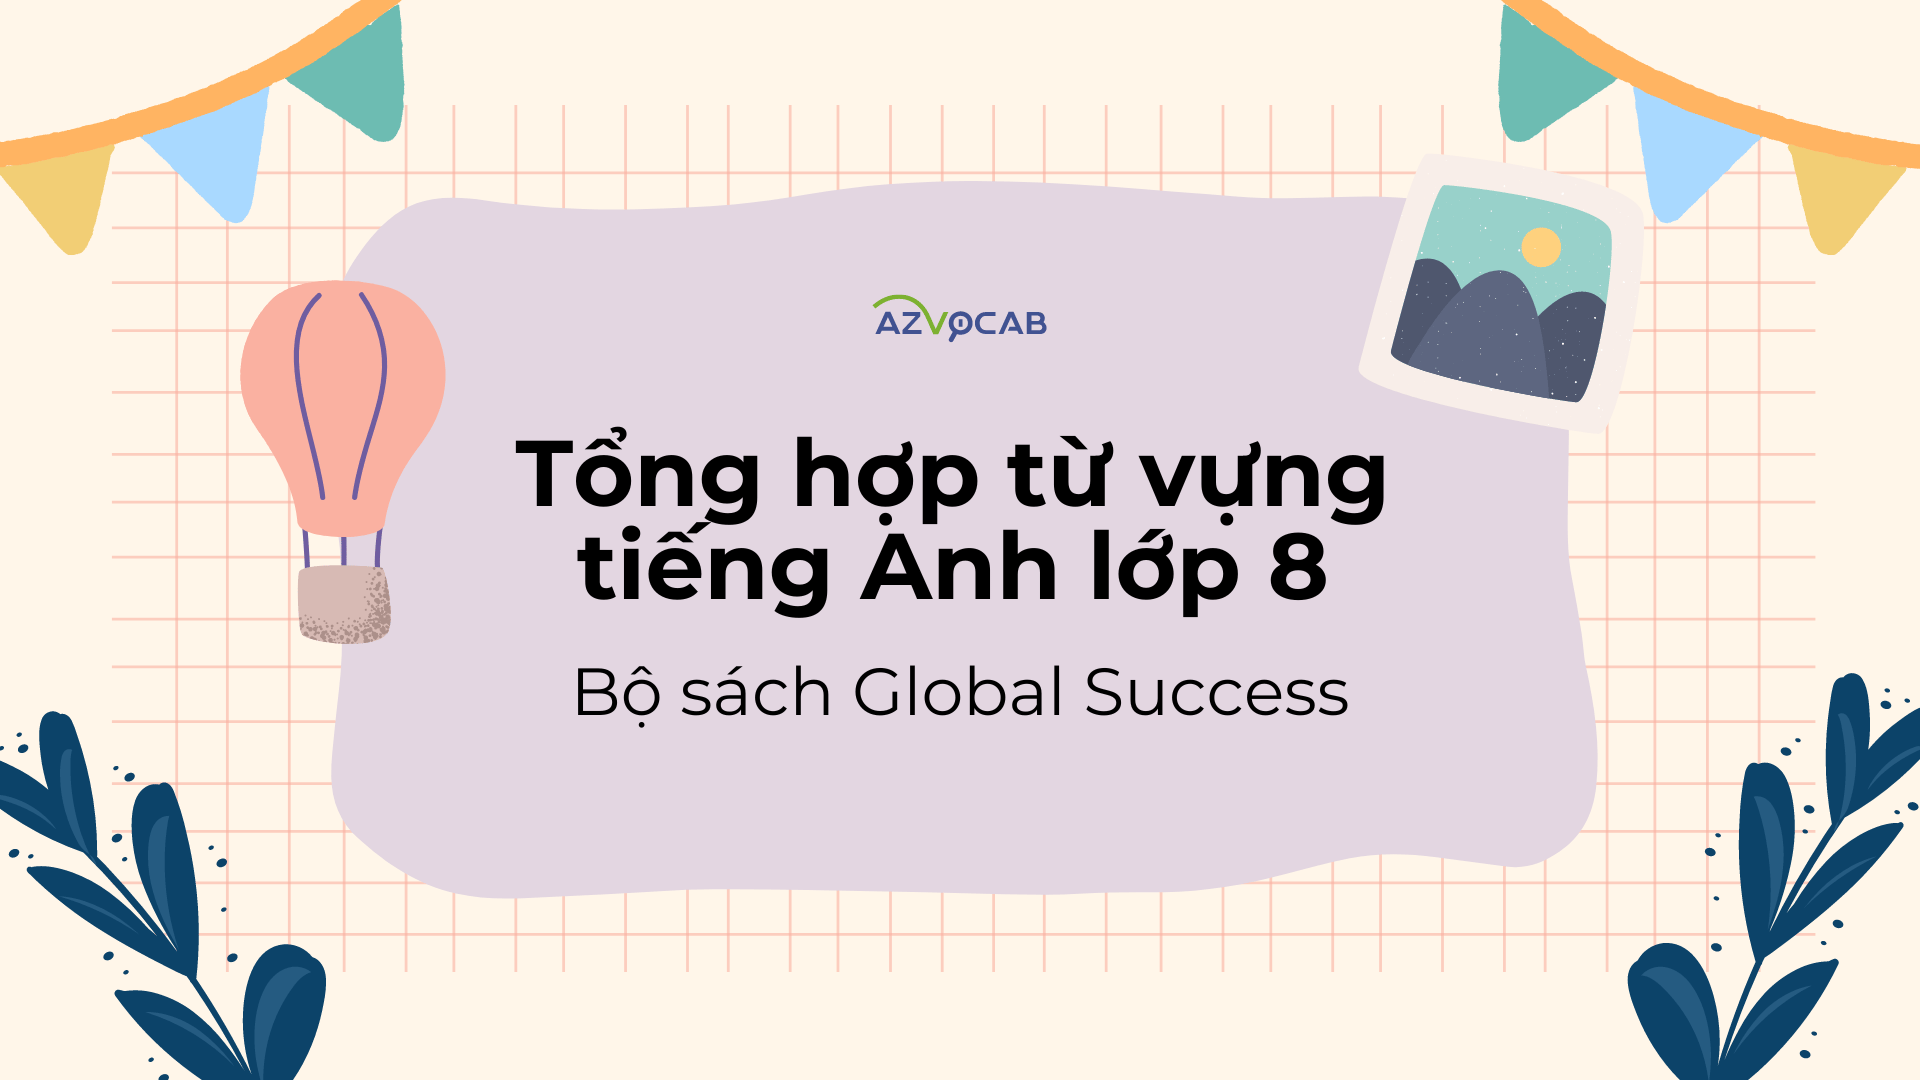 Tiếng Anh lớp 8 Global Success